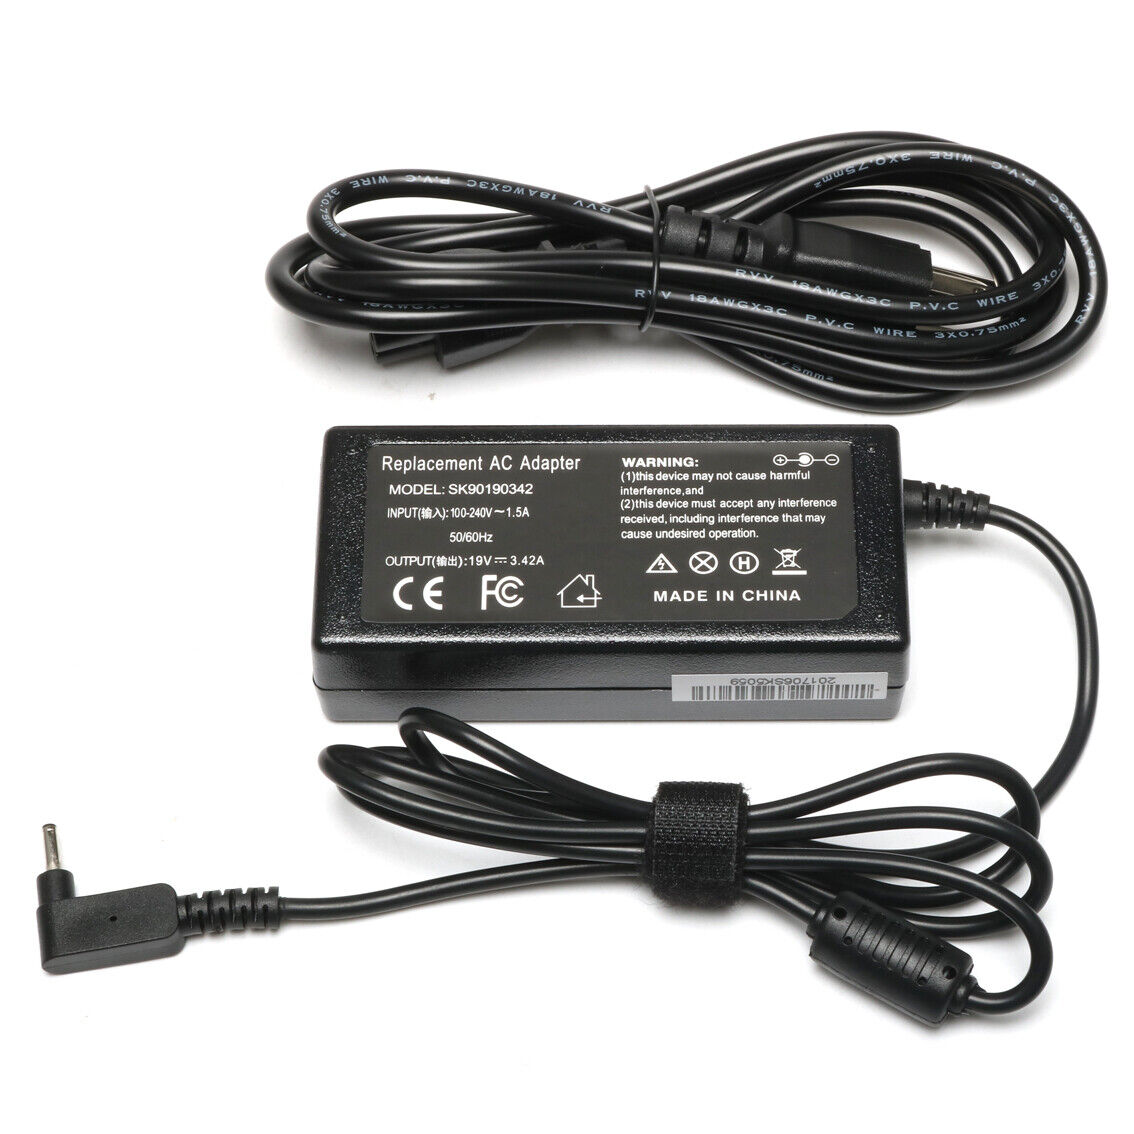 19V 3.42A 65W AC Adapter for Acer Chromebook C740 C910 CB3 CB5 Series Charger